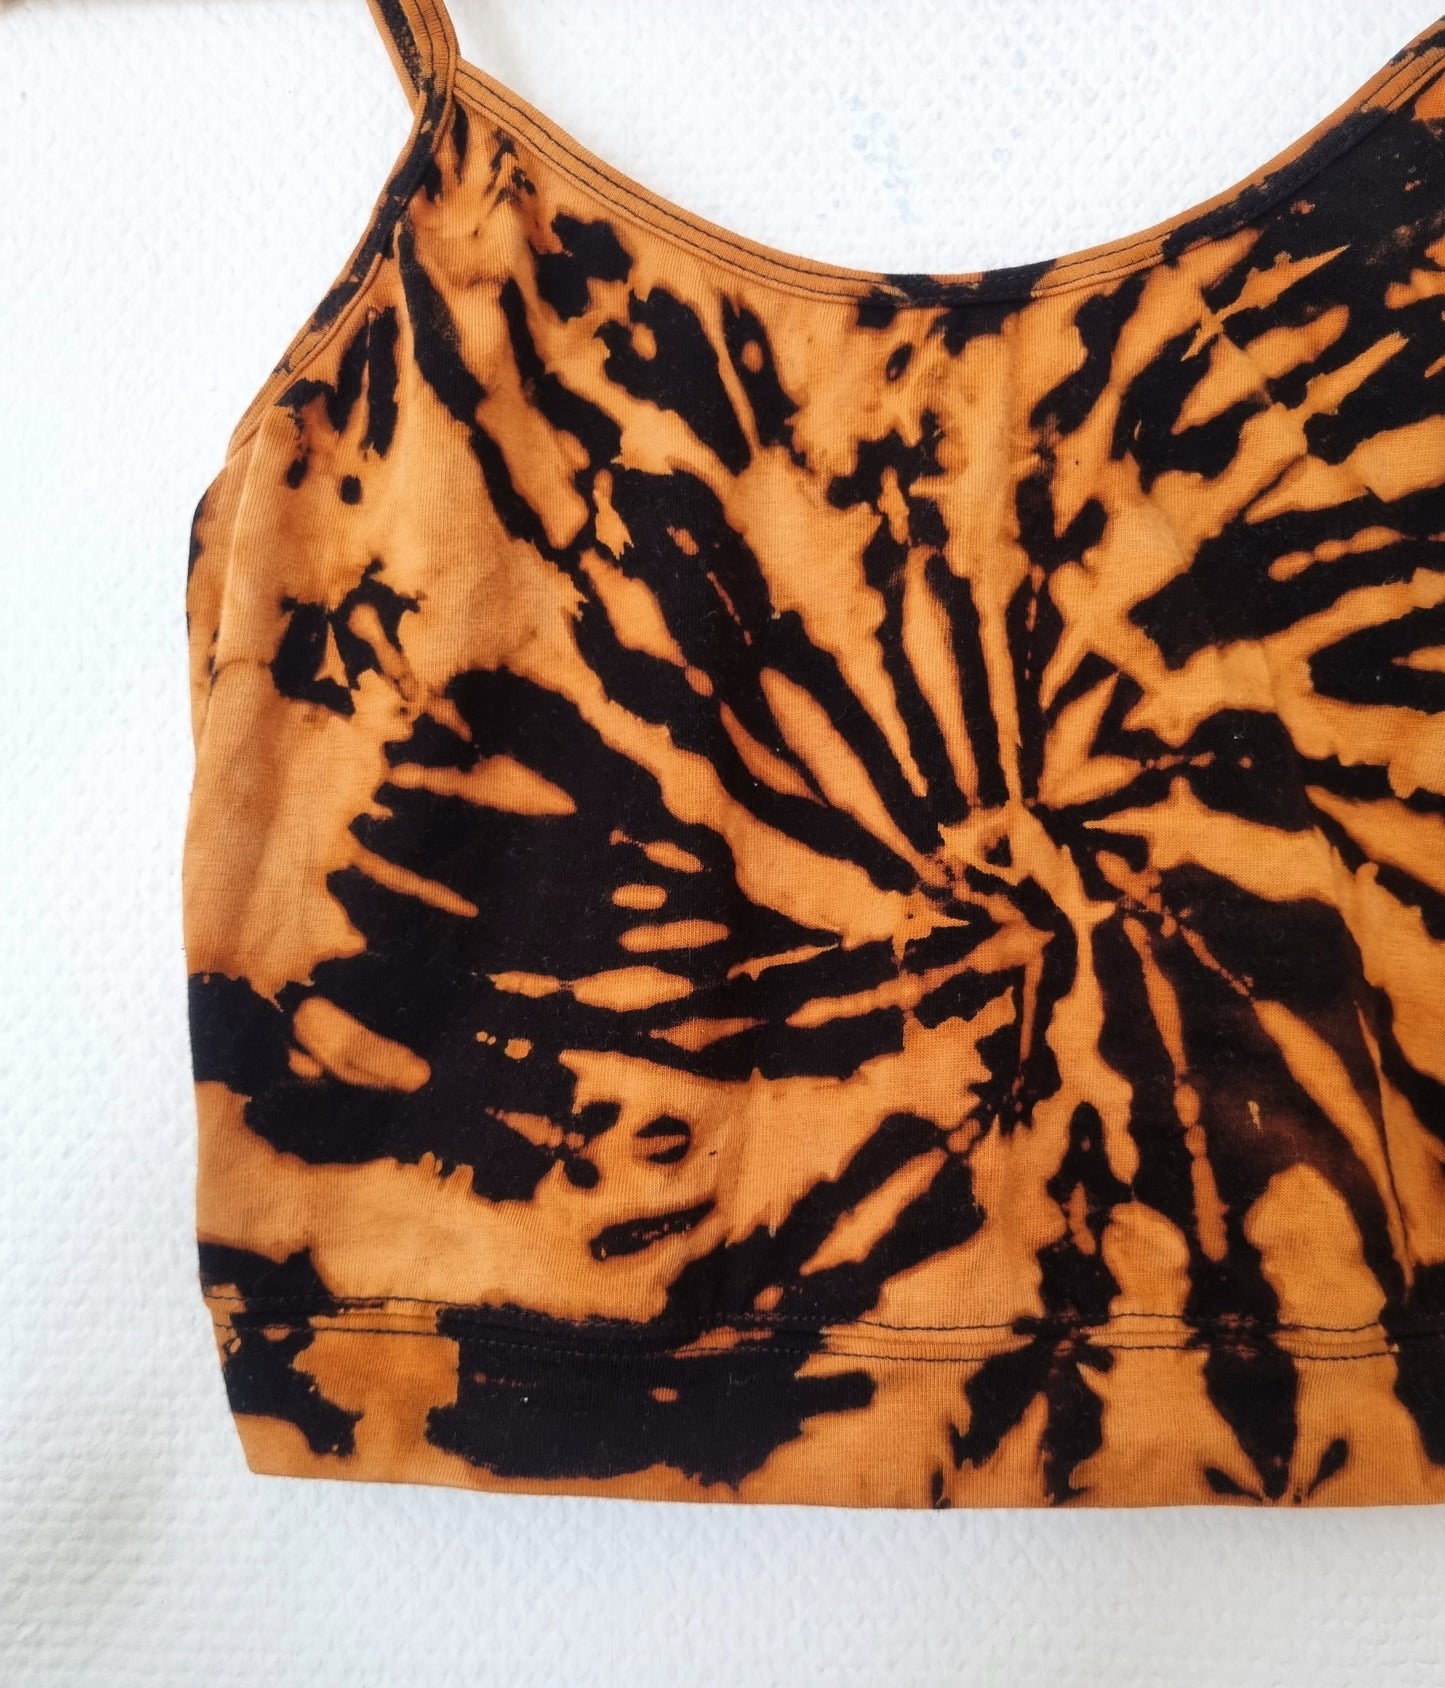 Hand Designed Fitted Bleach Tie-Dye Camisole Top